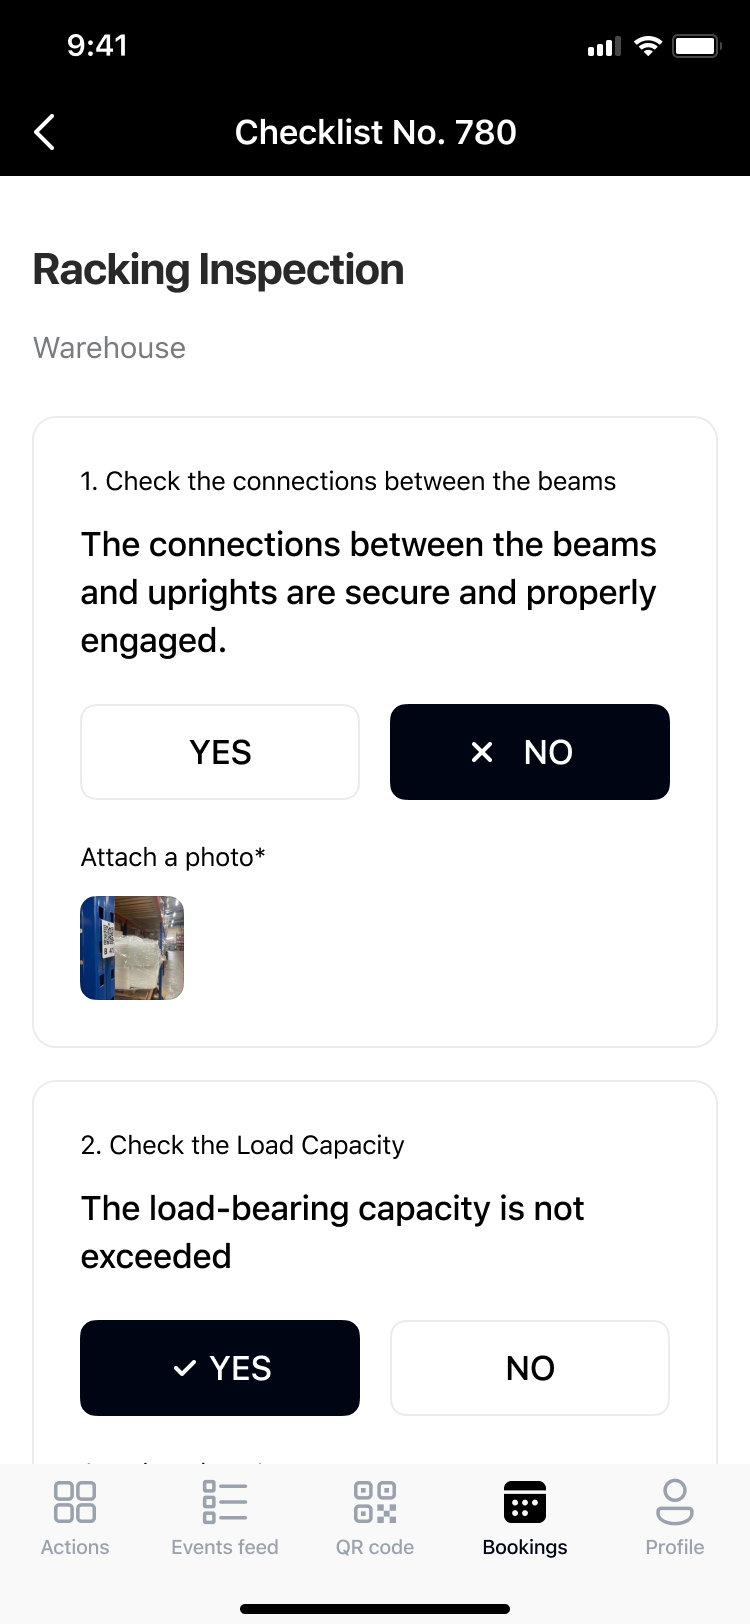 Checklist for racking inspection